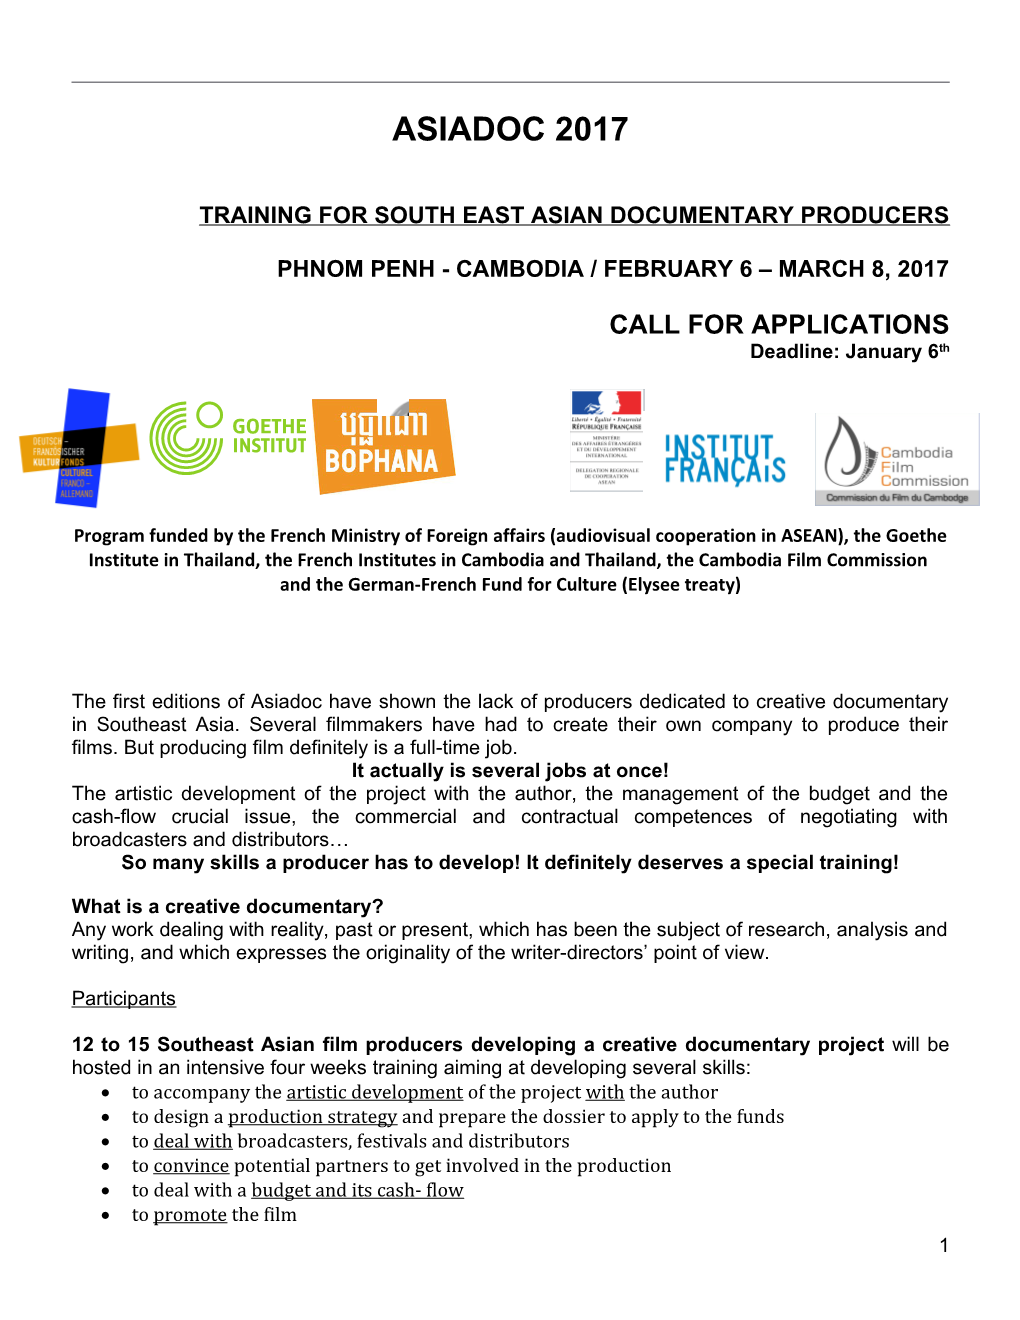 Training for South East Asian Documentary Producers